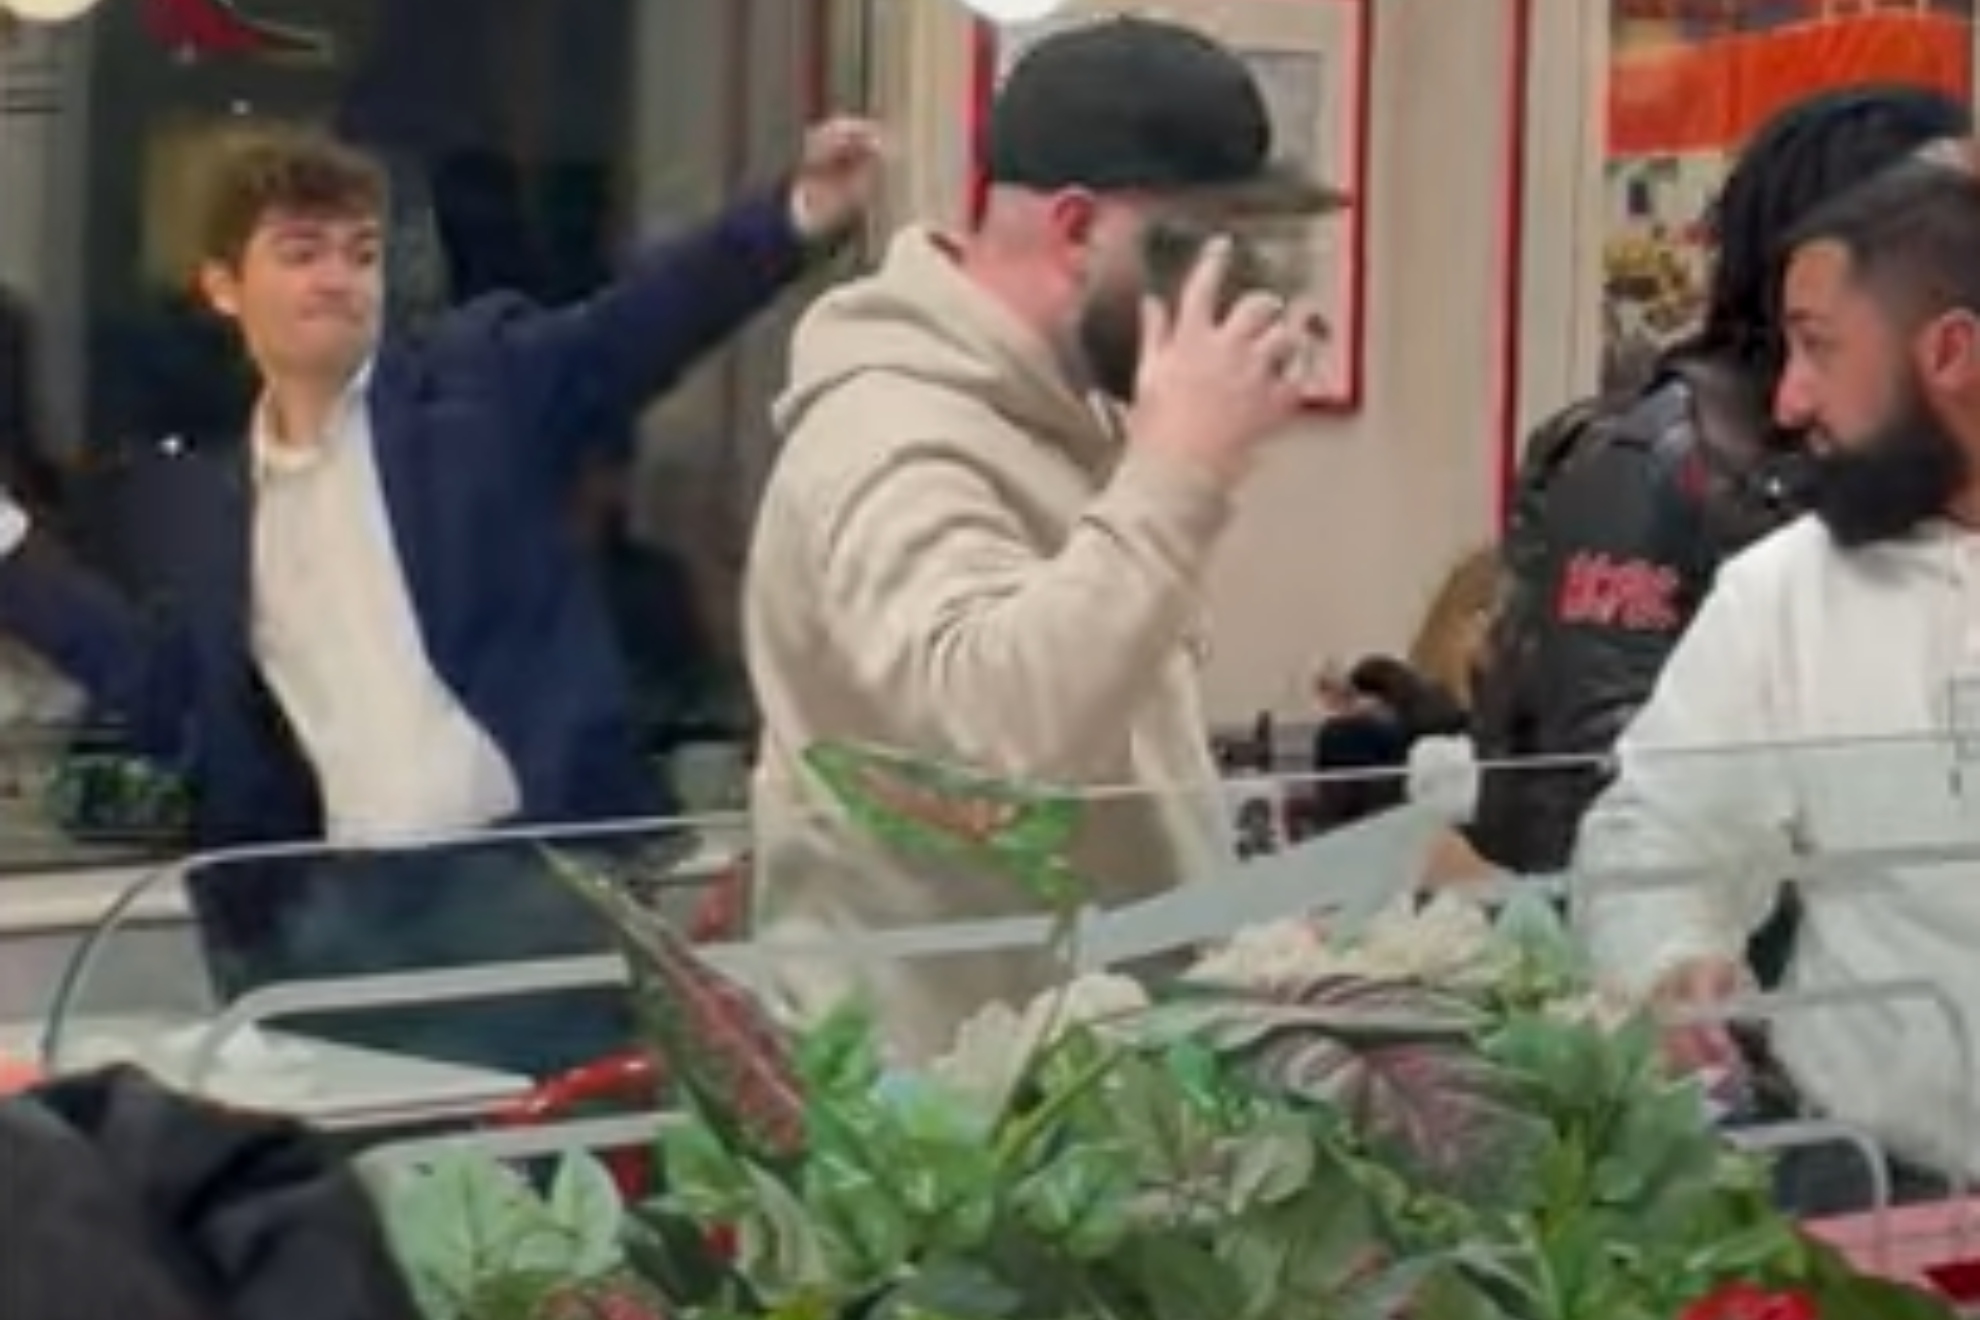 White Nationalist sparks hateful food fight at a fast food restaurant